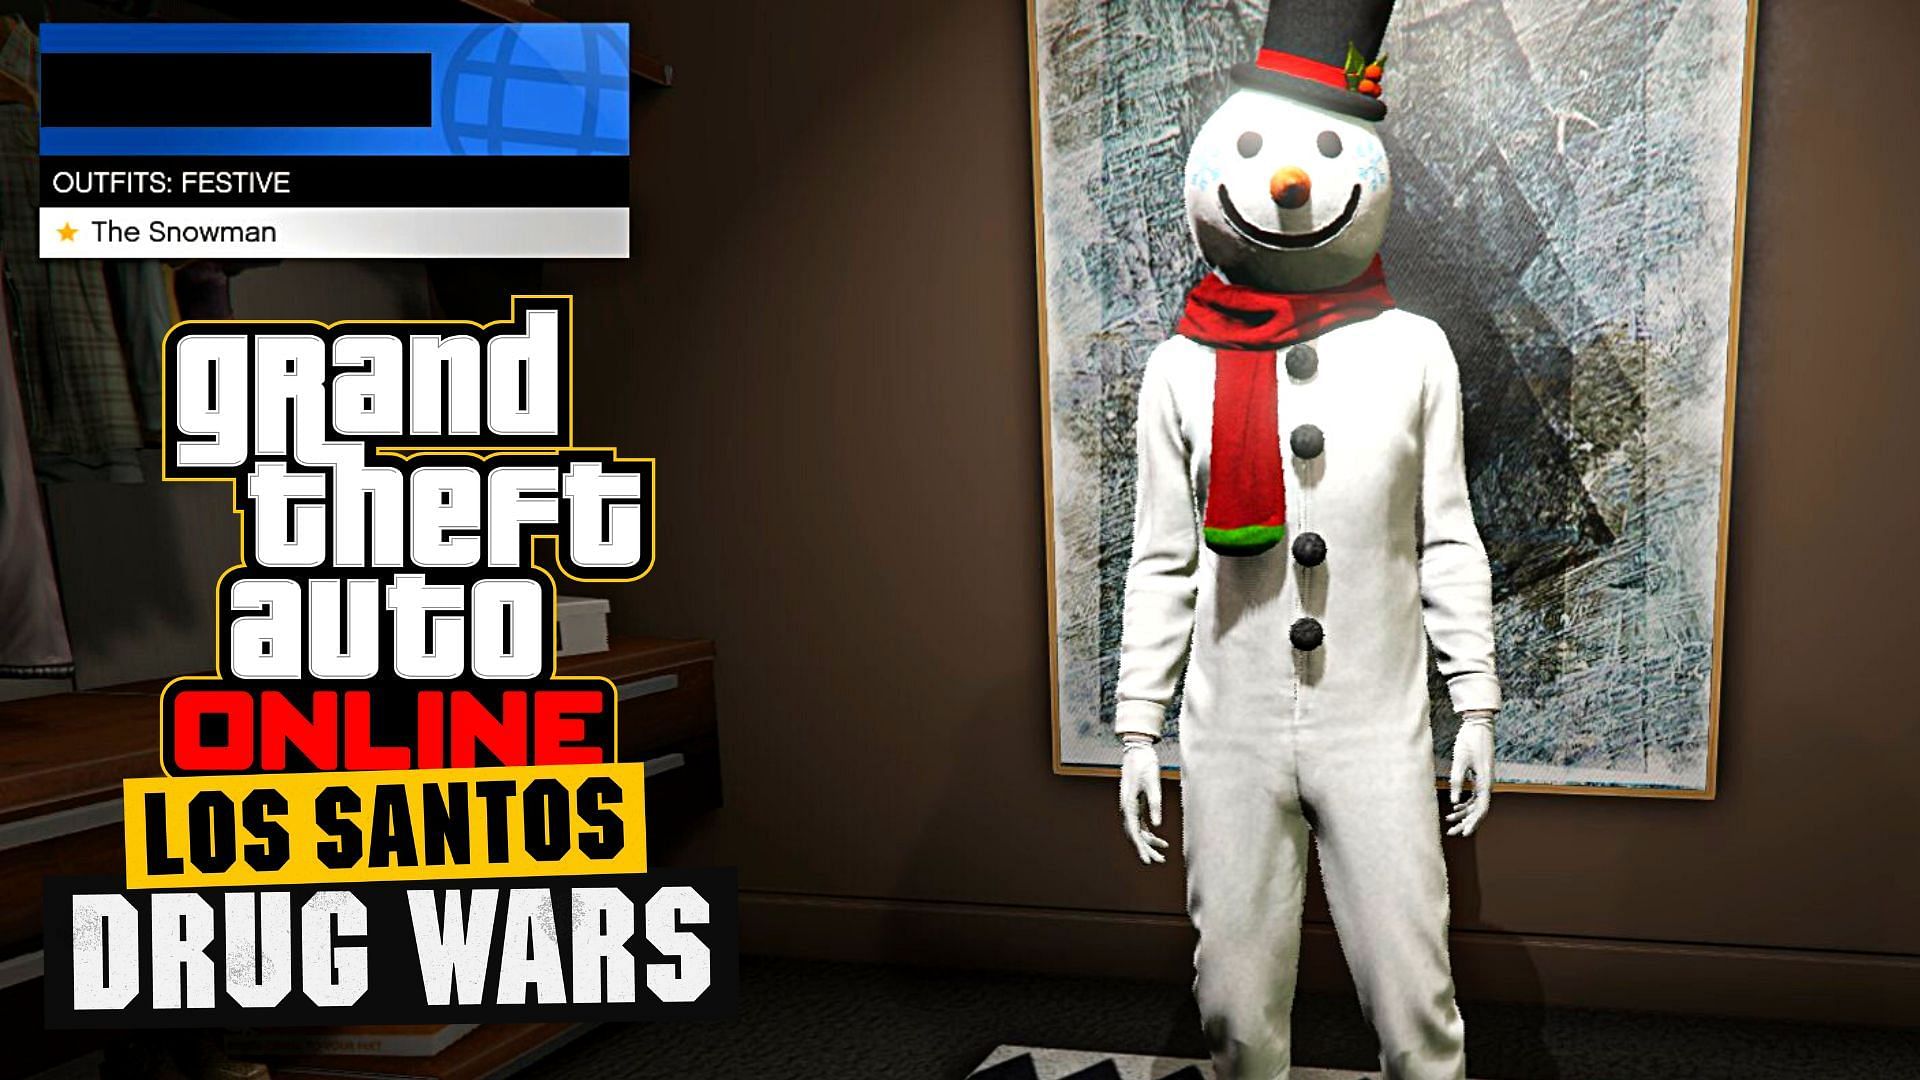 New report leaked snowmen collectibles event coming to GTA Online Los Santos Drug Wars drip feed (Image via WildBrick142 on Twitter)